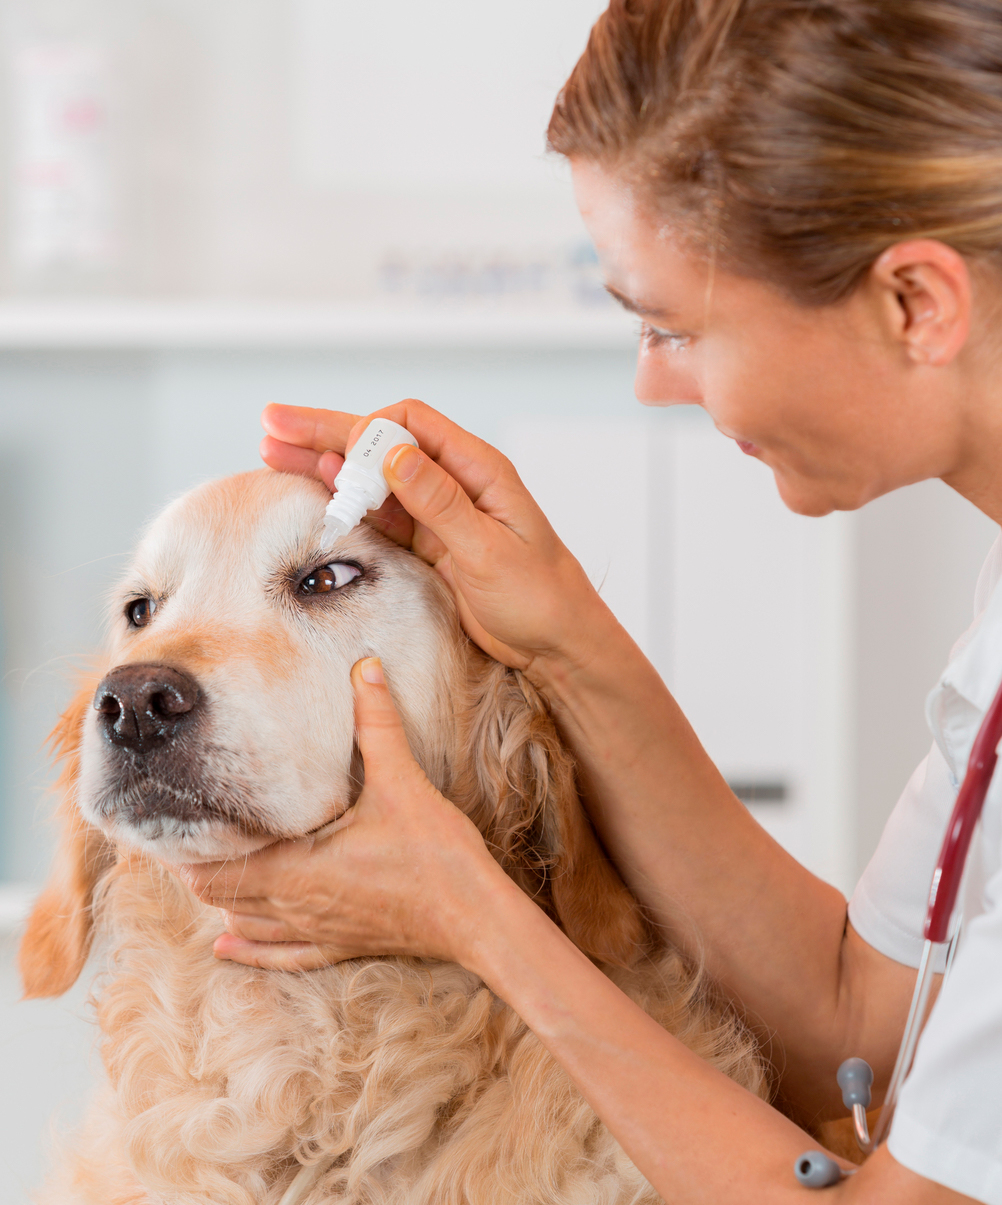 Desmopressin Acetate 0.01% ophthalmic solution compounded for cats and dogs